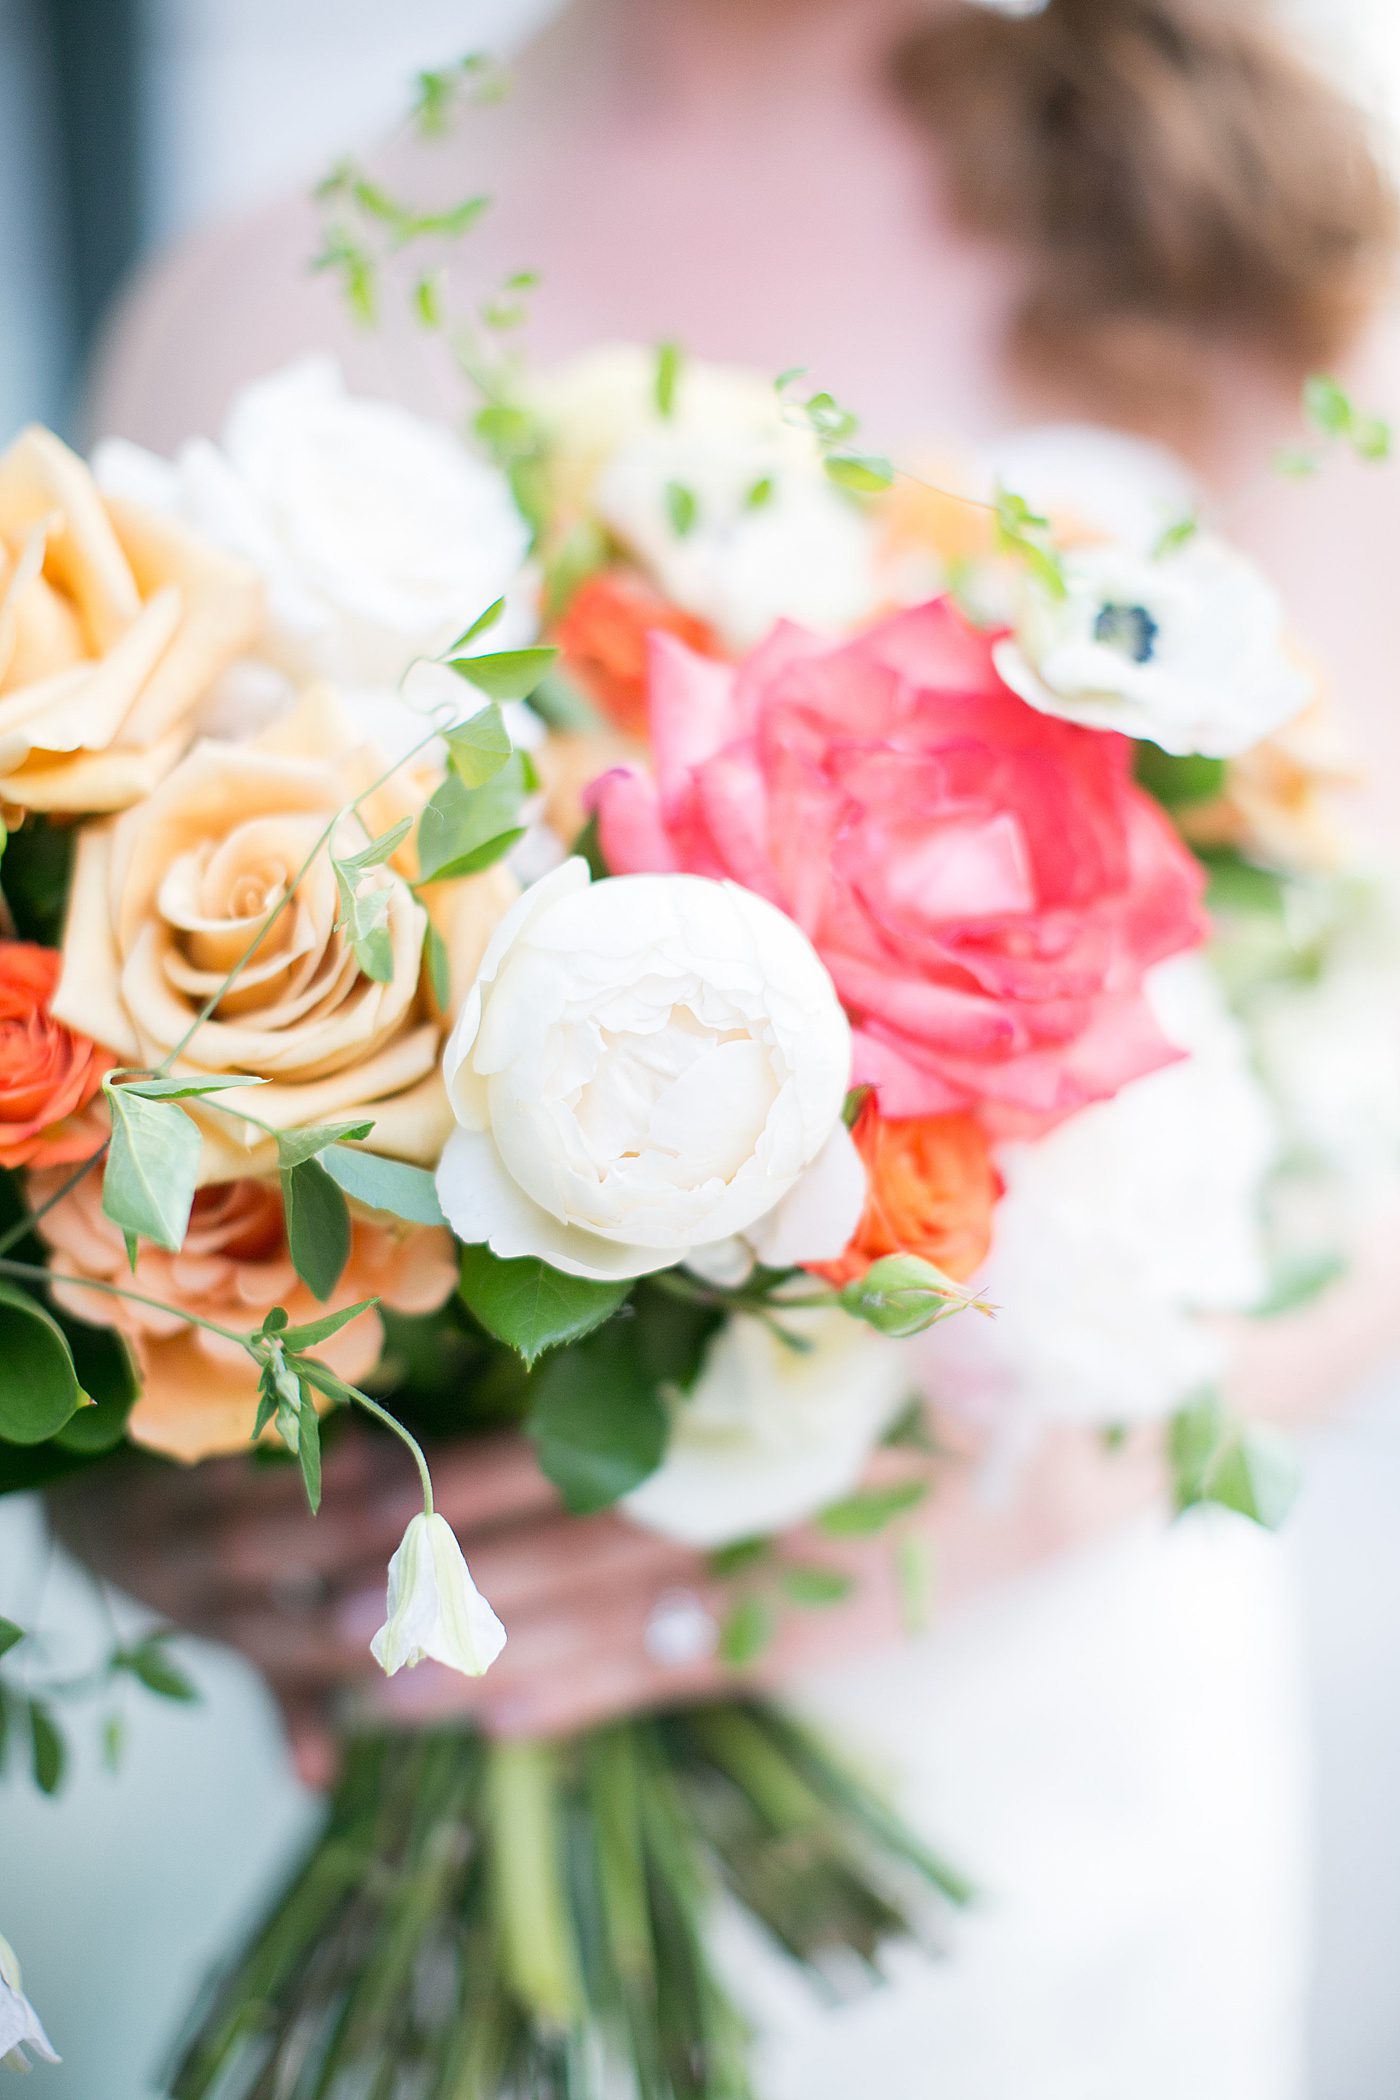 How to Hold Your Bridal Bouquet